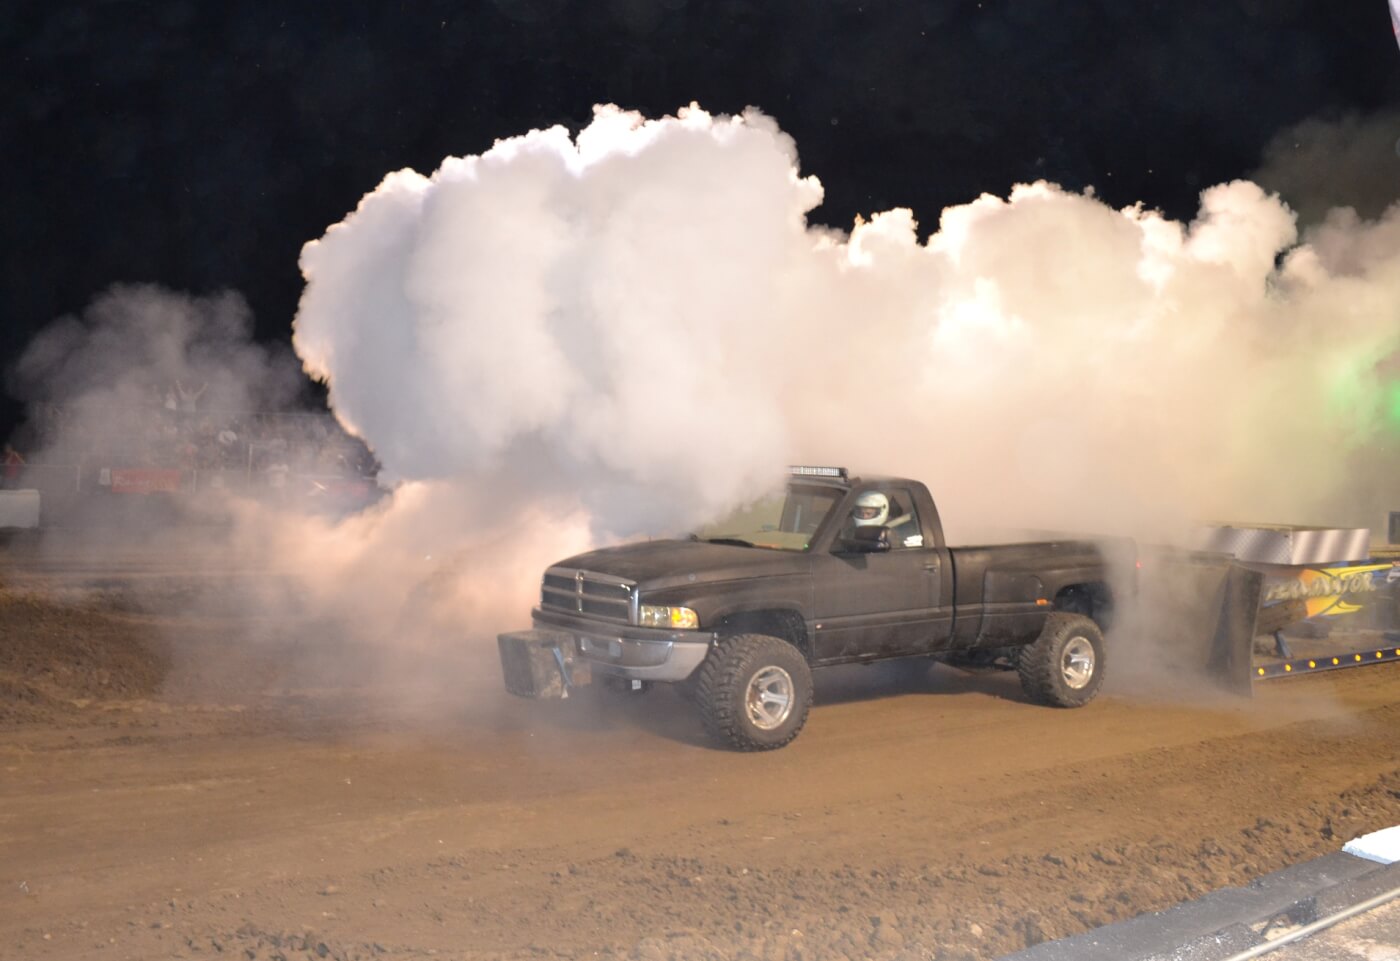 1,100 hp worth of fuel, air and nitrous